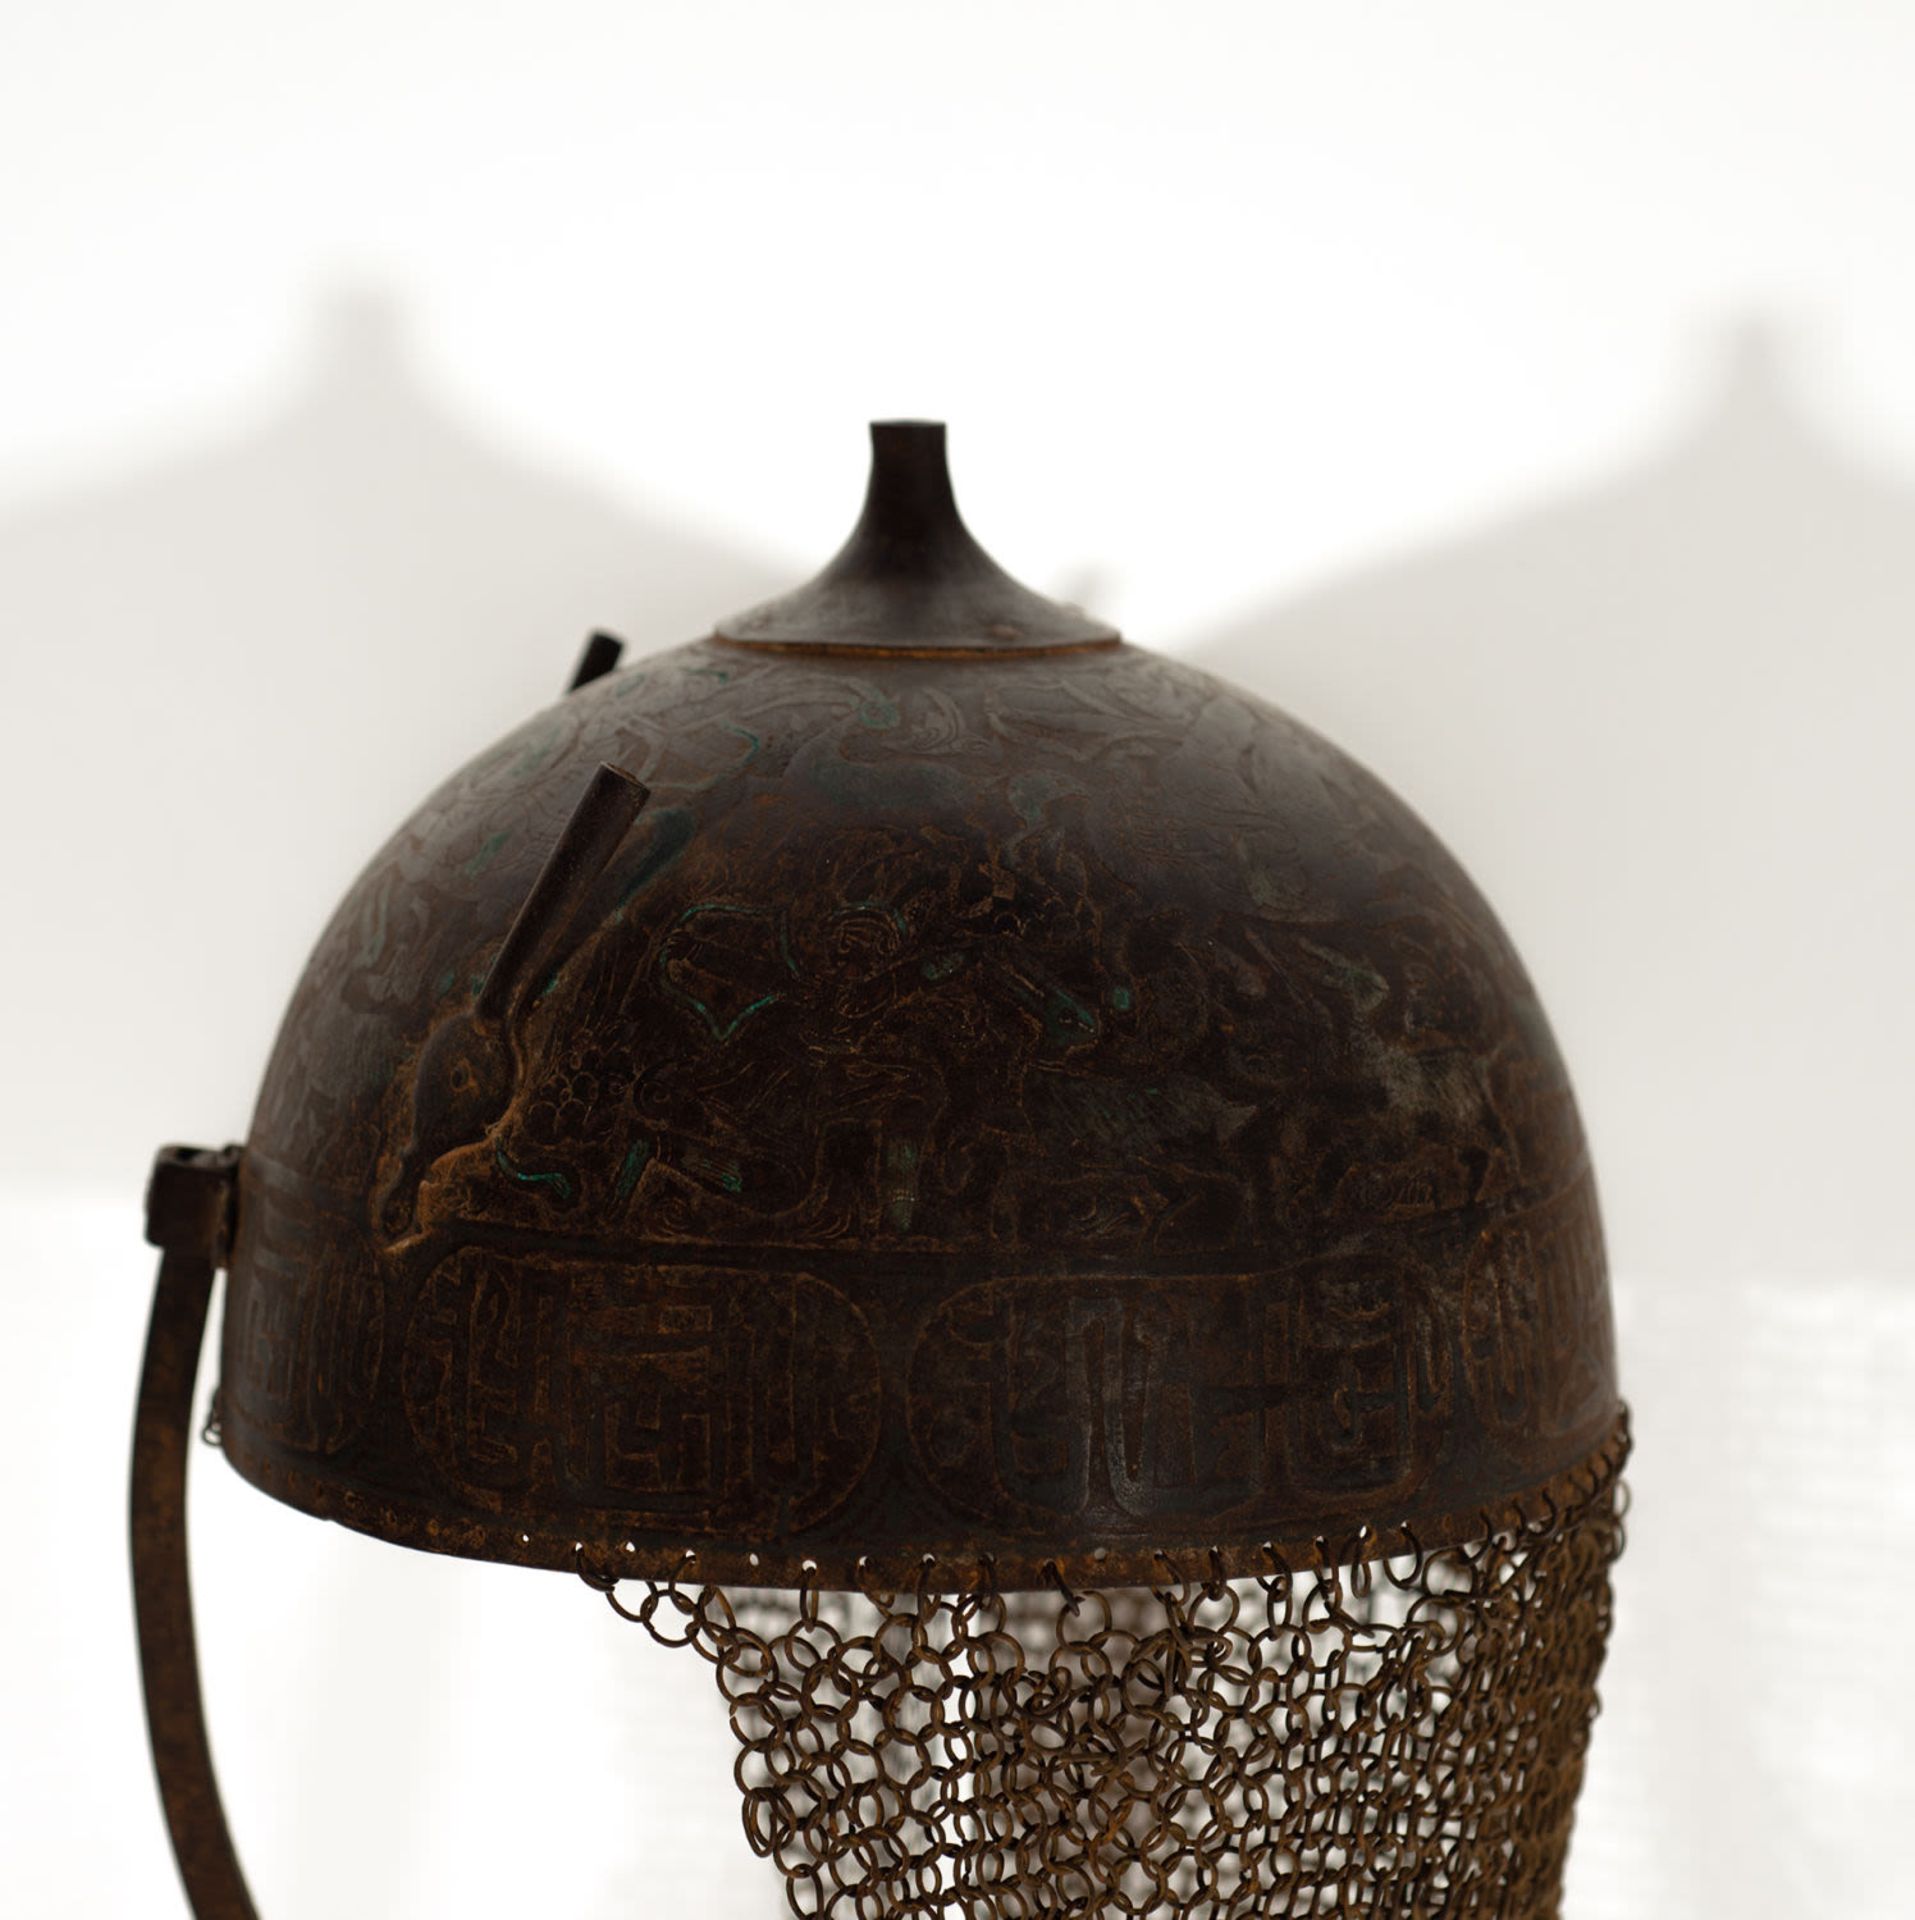 "Kulah Khud" Helmet of a Persian or Mughal Infantry Soldier, Central Asia, 18th - 19th century - Image 3 of 6